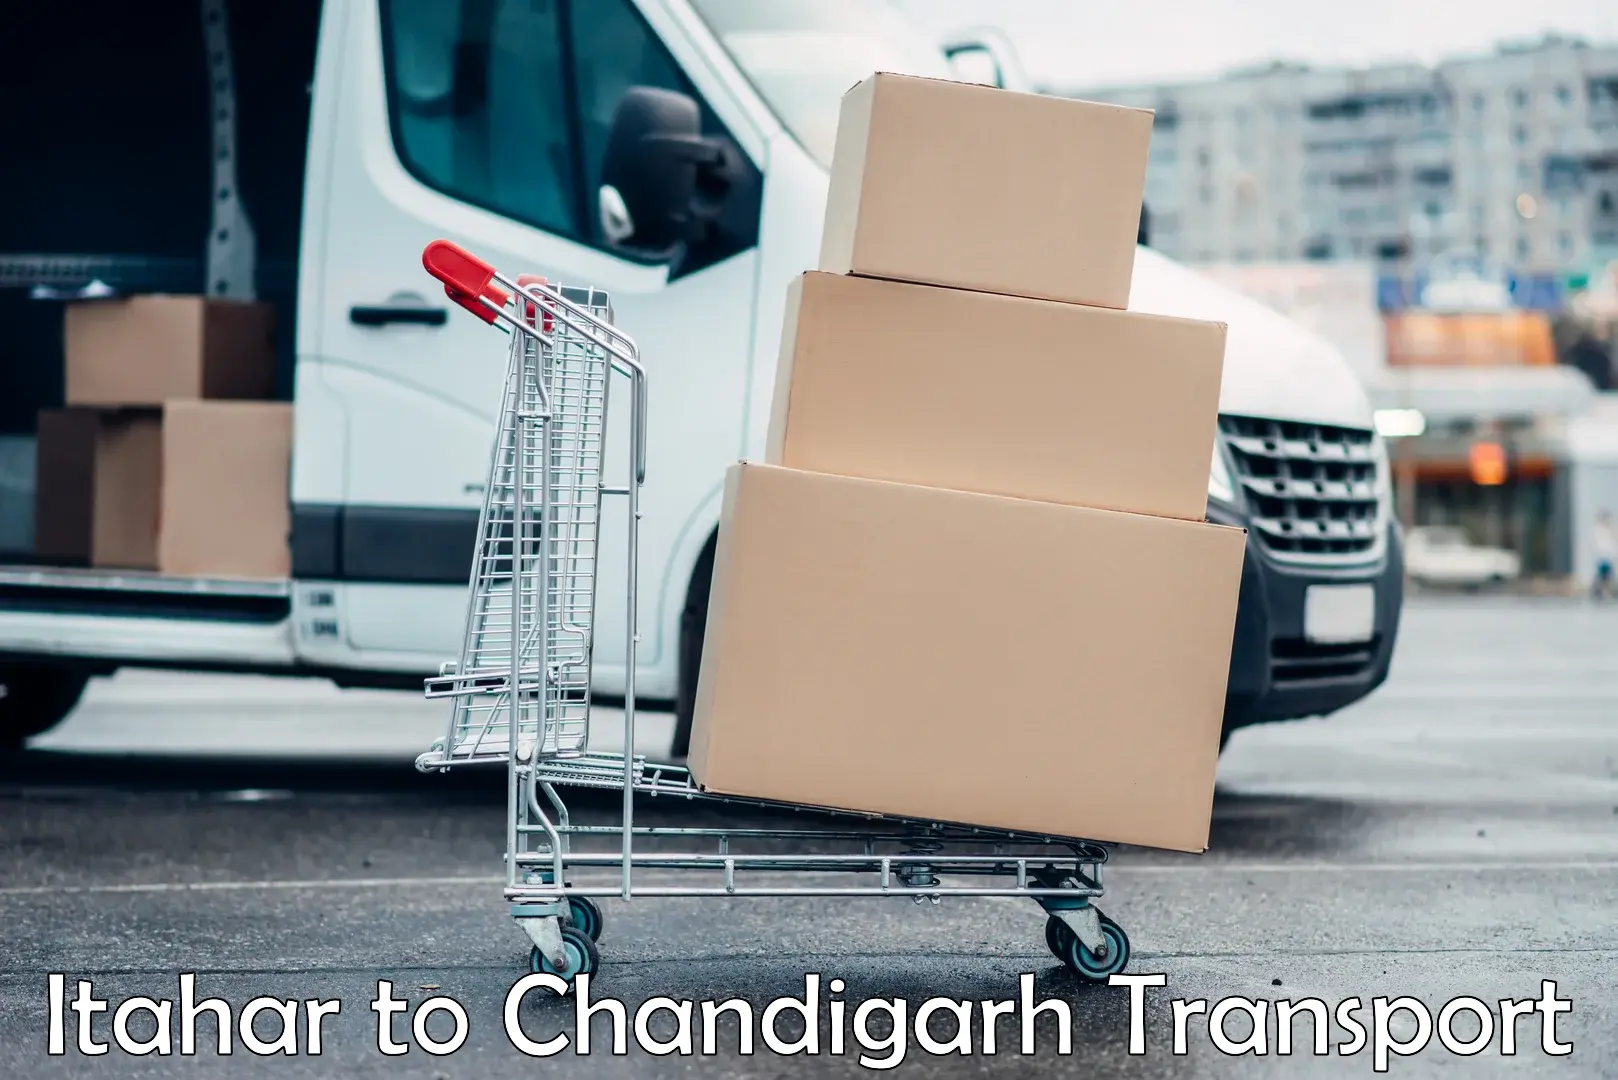 Daily transport service Itahar to Chandigarh